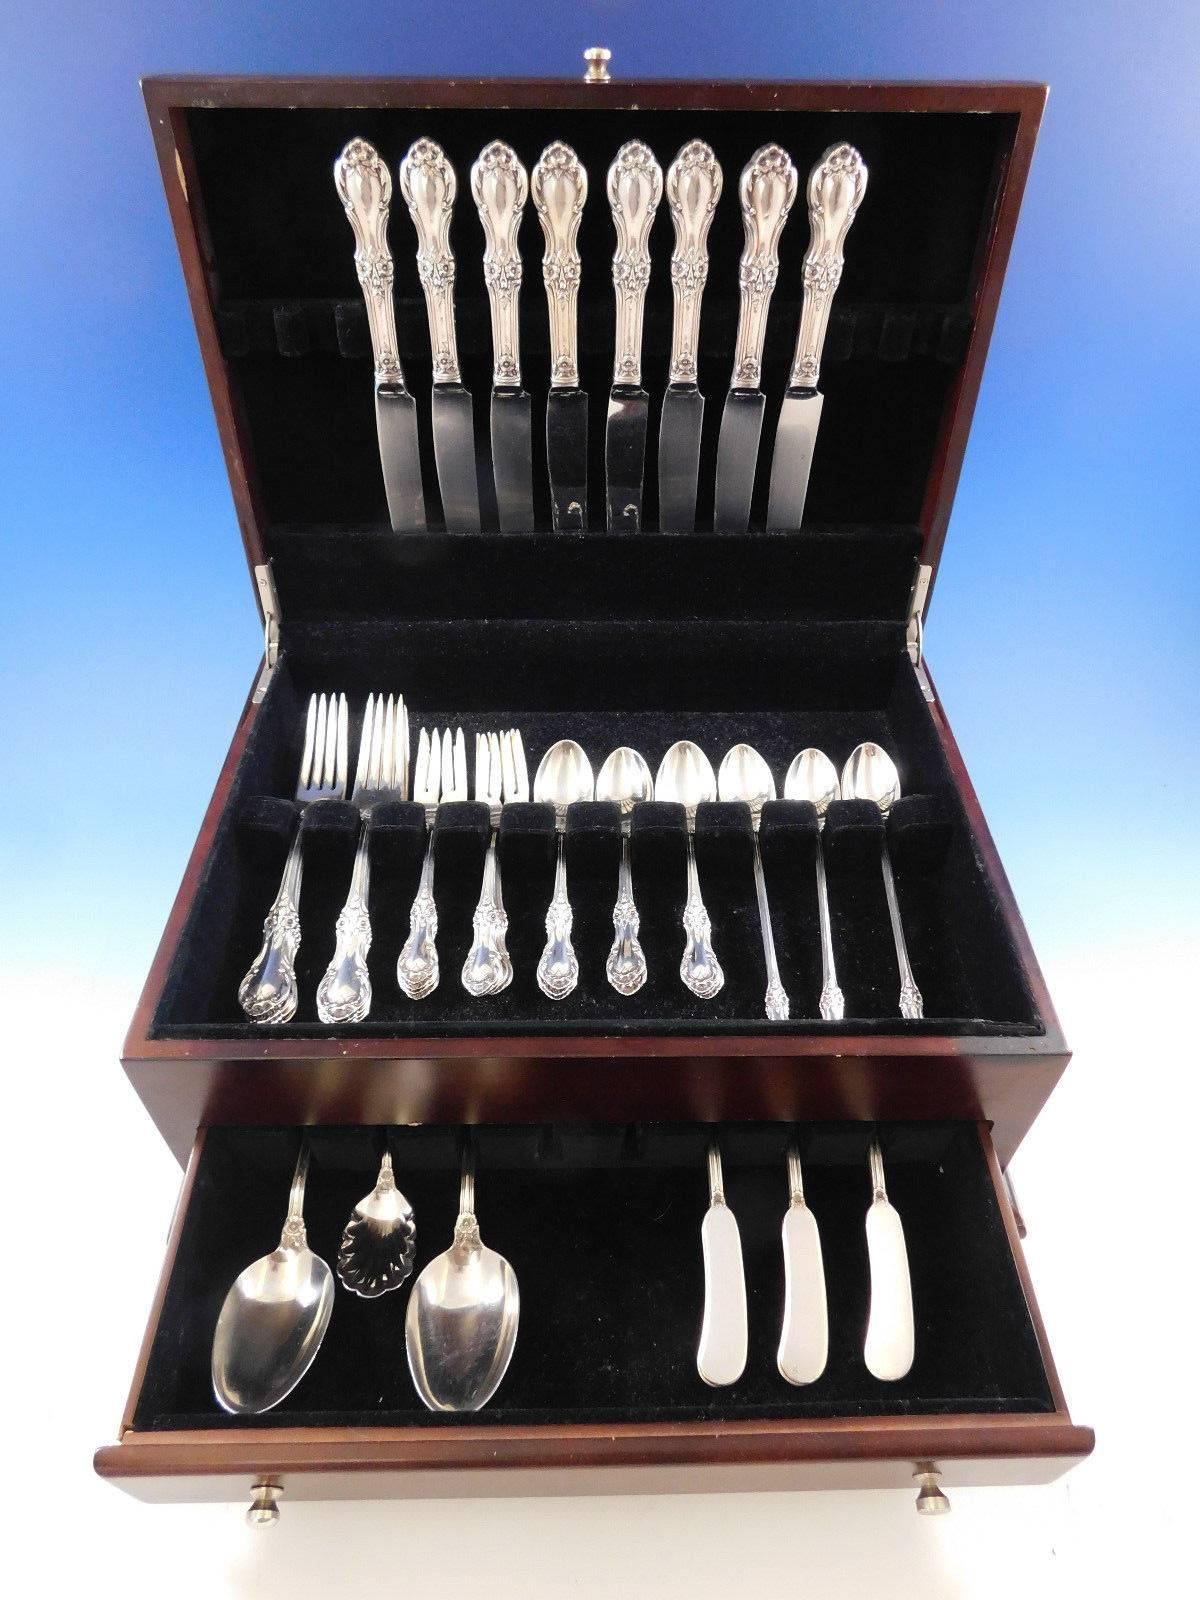 Dinner size Wild Rose by International sterling silver flatware set of 51 pieces. This set includes: 

Eight dinner size knives, 9 5/8